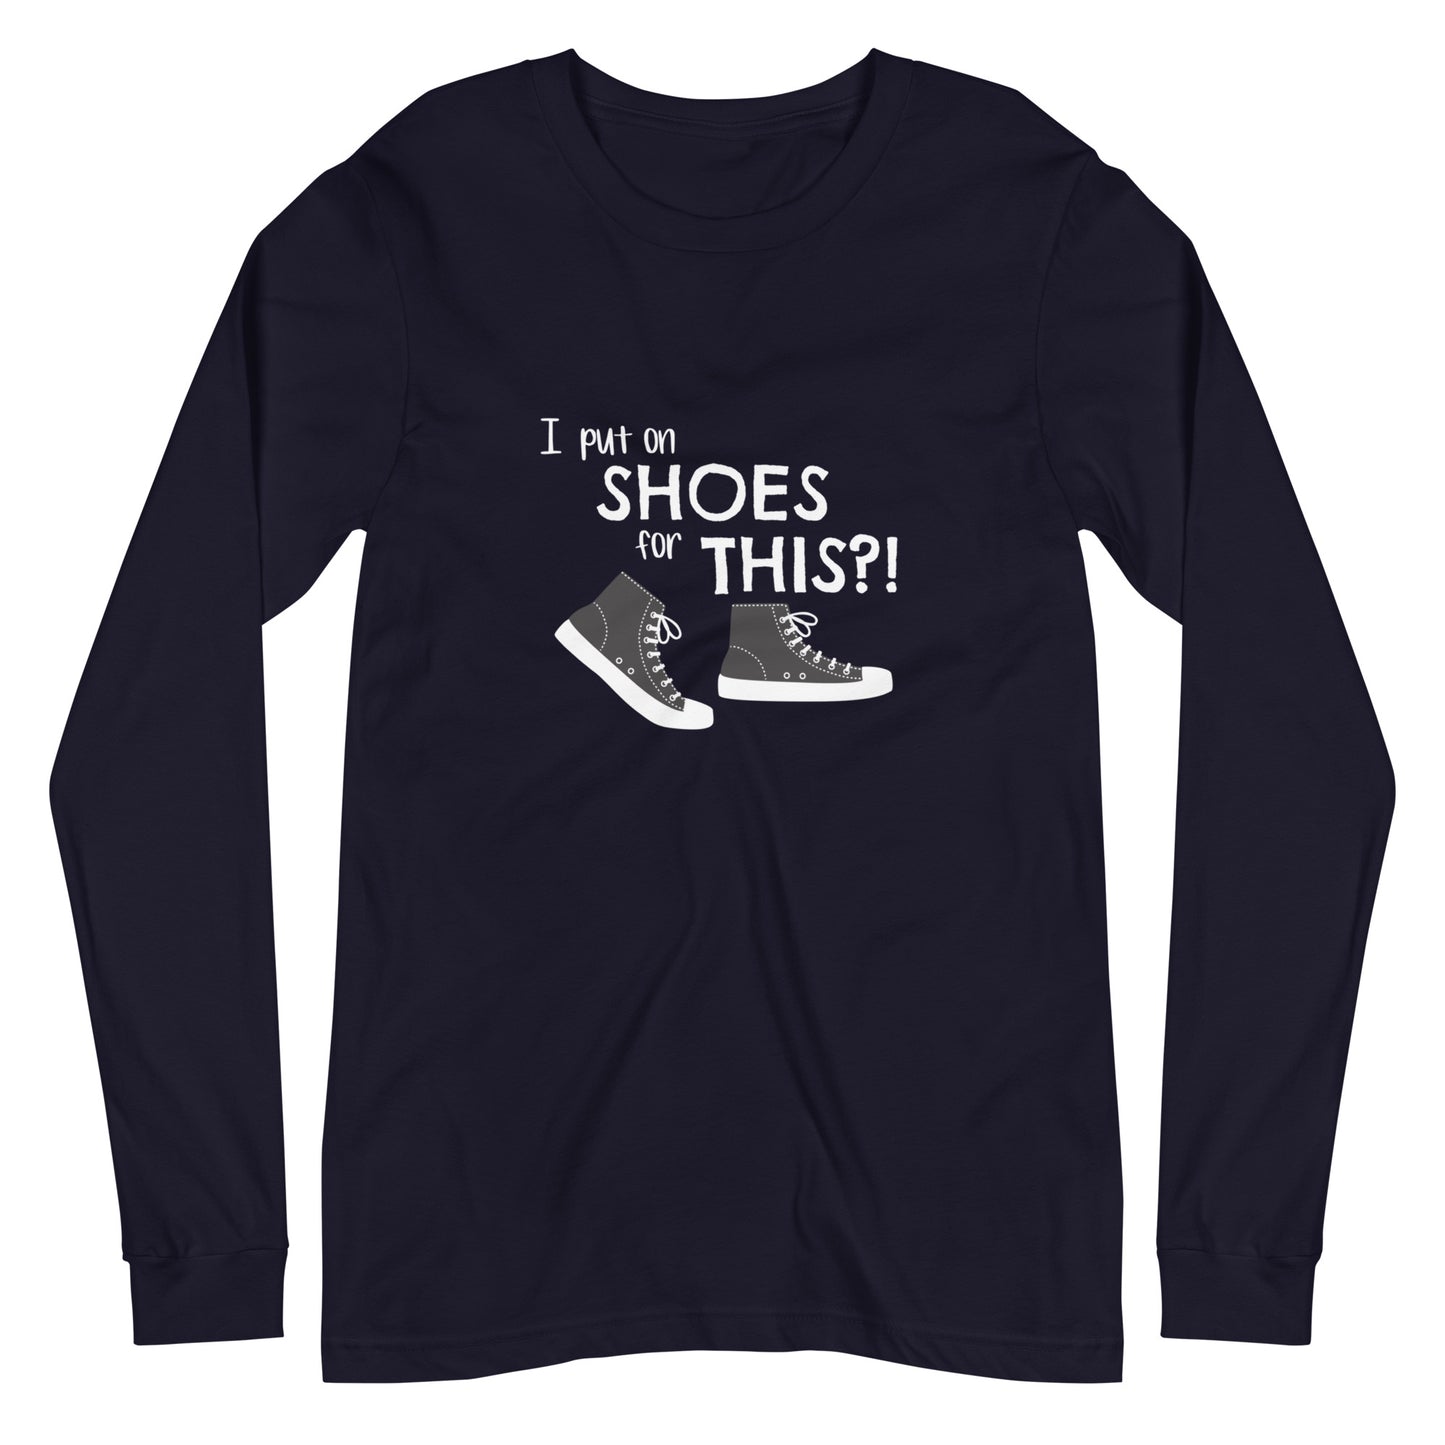 Navy long-sleeve t-shirt with graphic of black and white canvas "chuck" sneakers and text: "I put on SHOES for THIS?!"